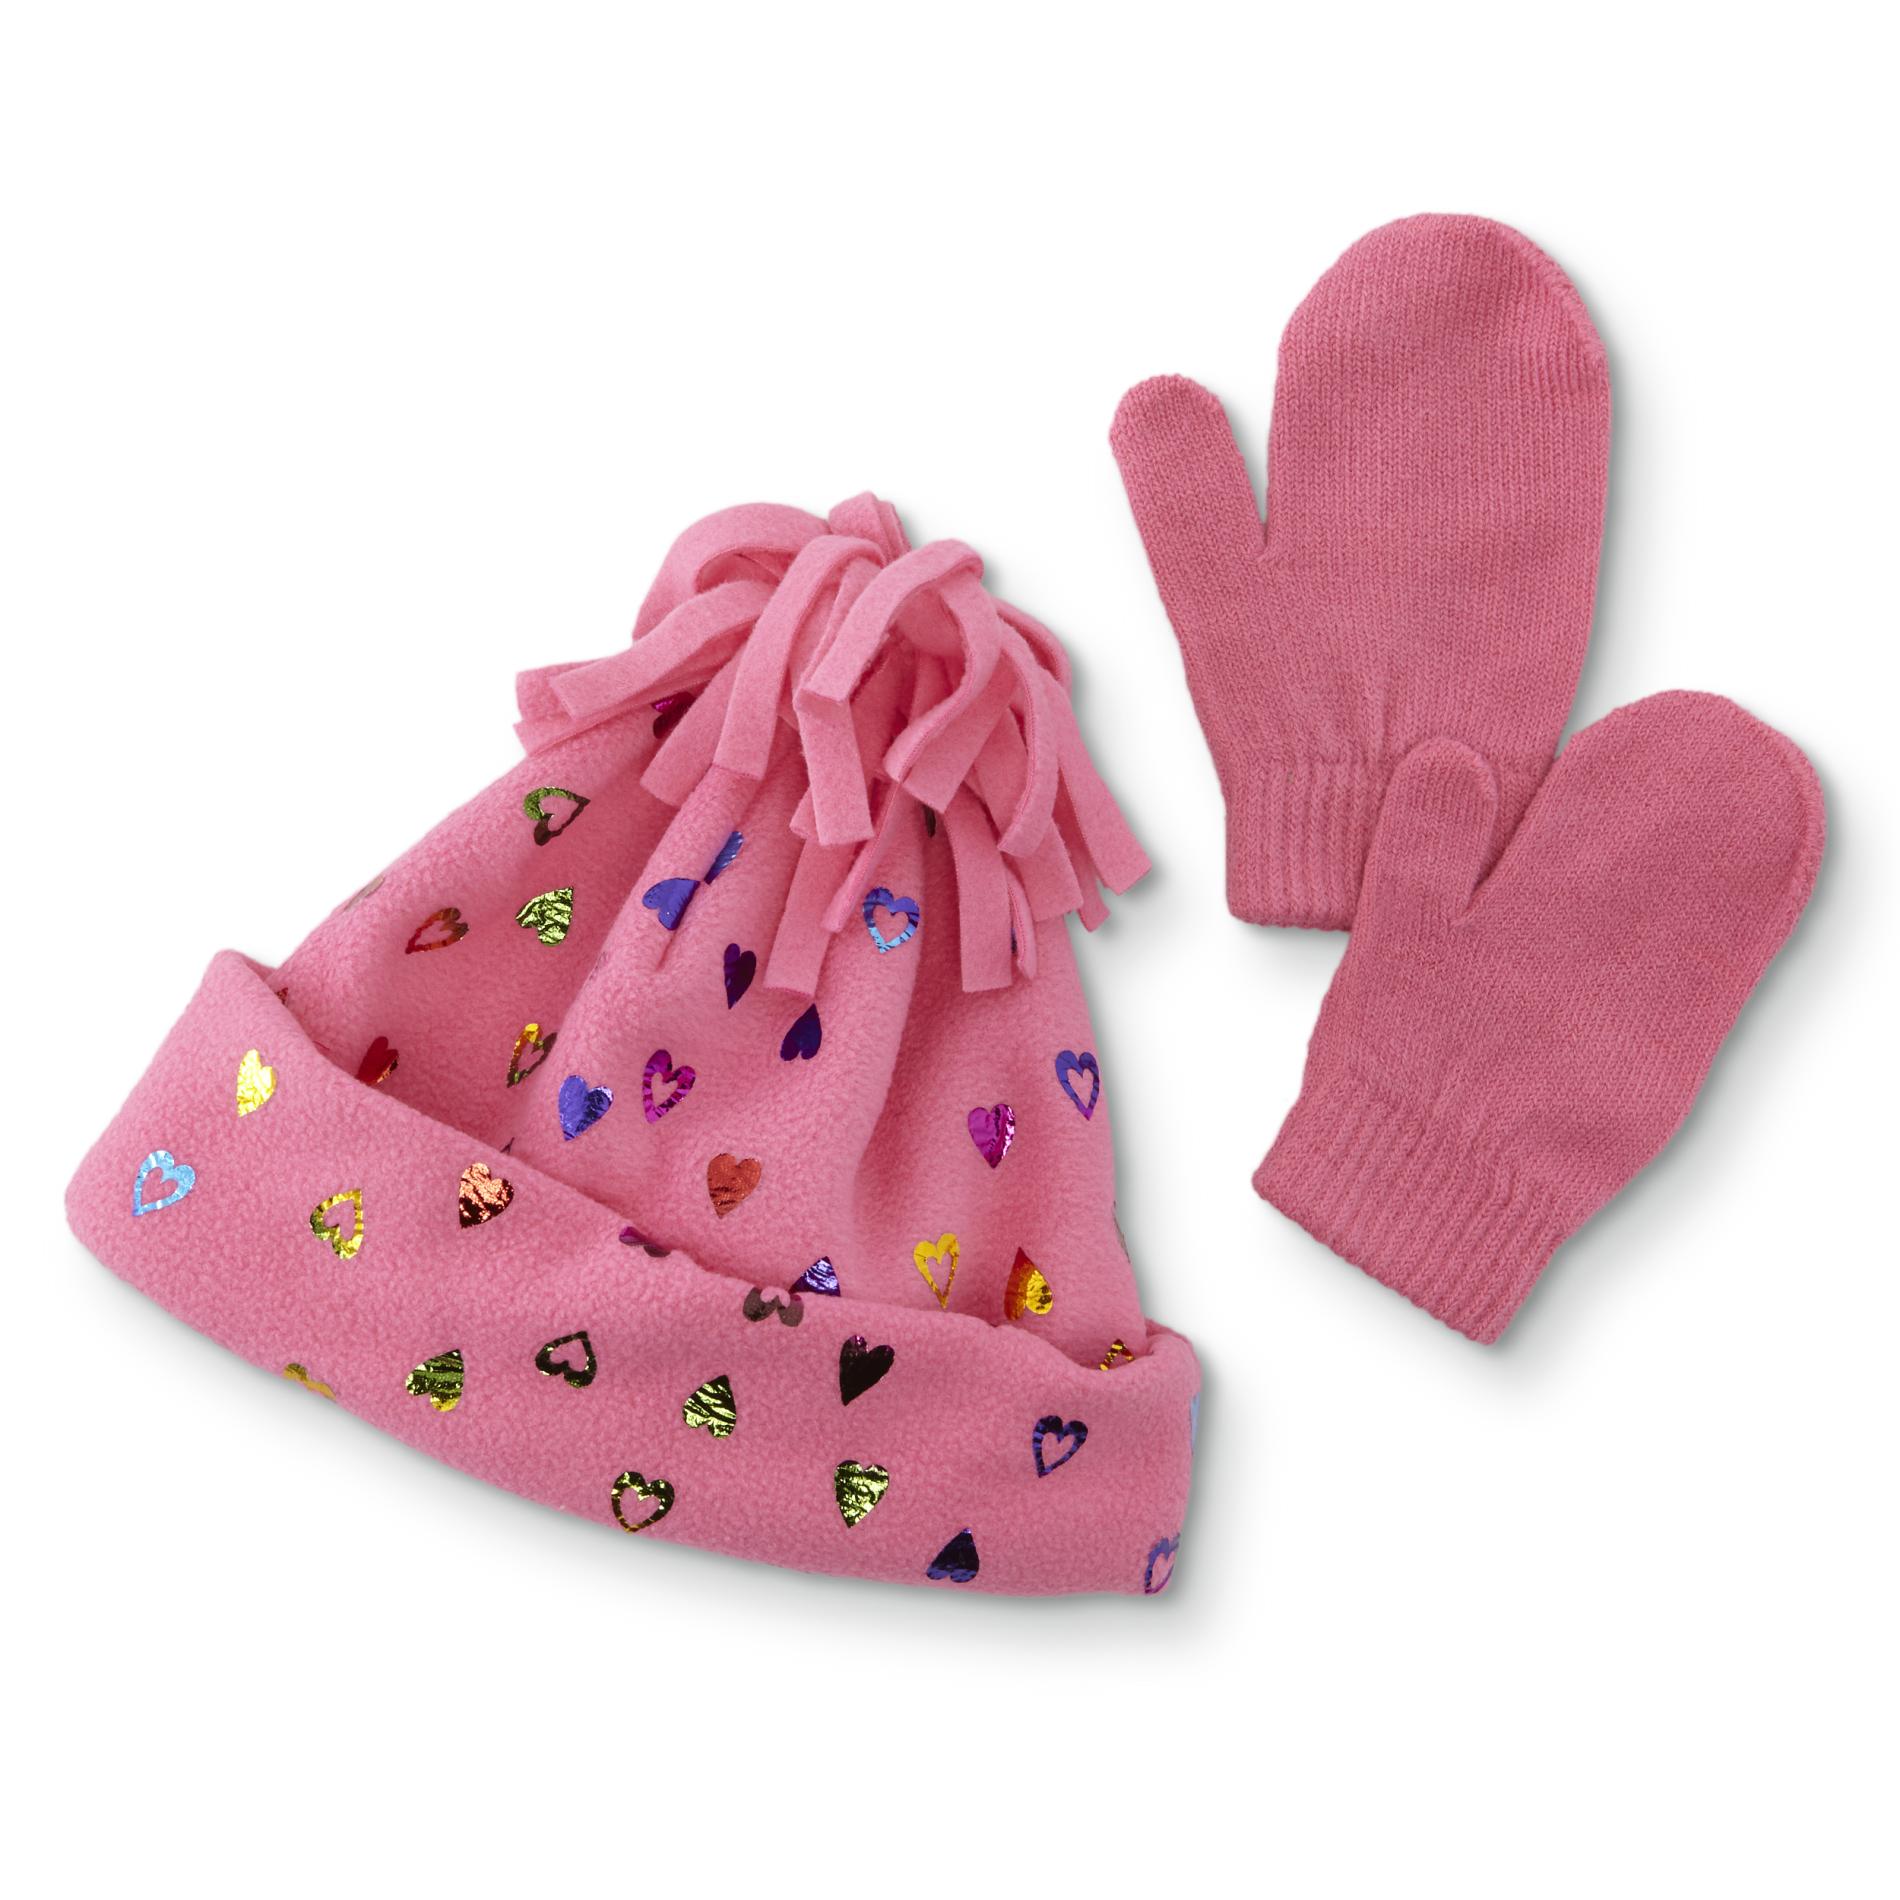 Simply Styled Toddler Girls' Fleece Beanie Hat & Stretch Knit Mittens - Hearts